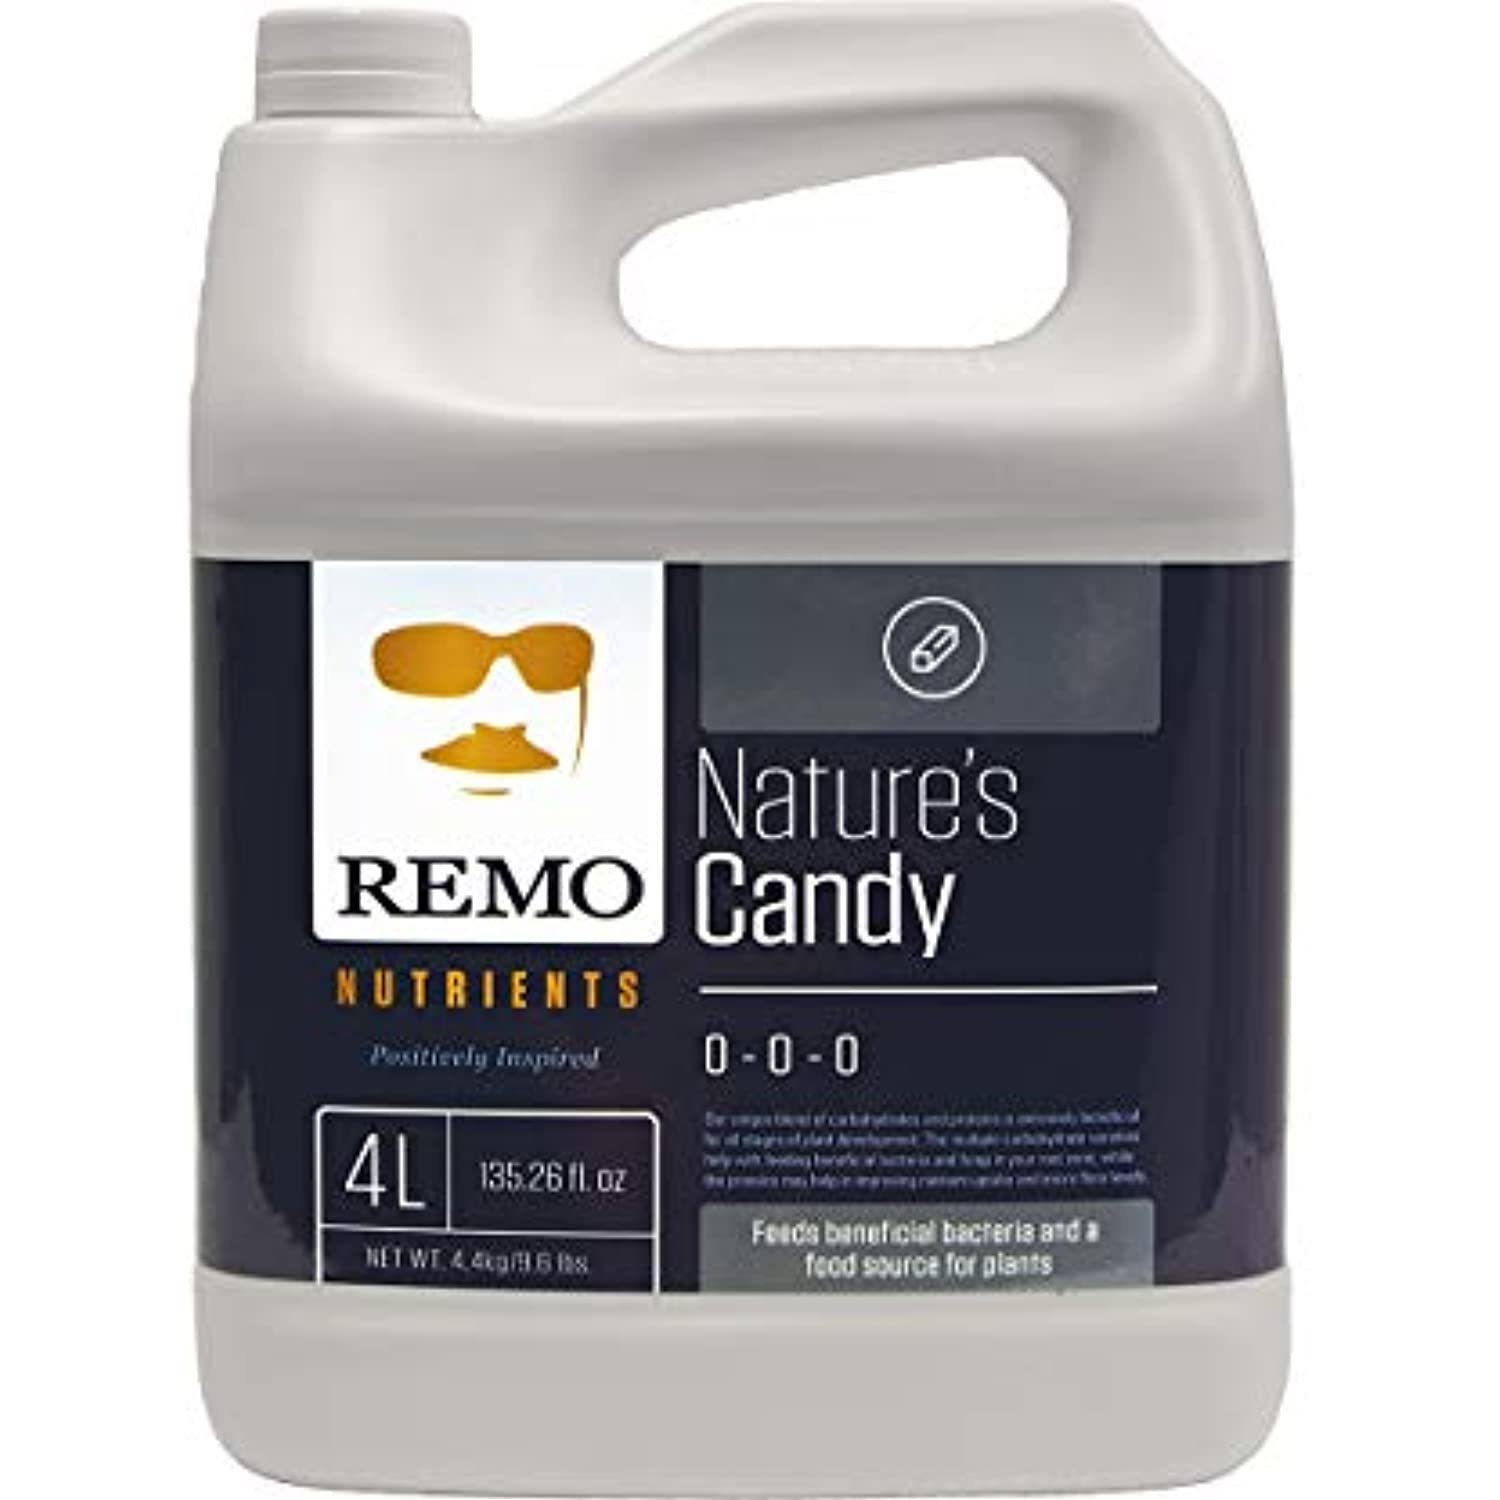 Remo Nutrient's Natures Candy - 4L